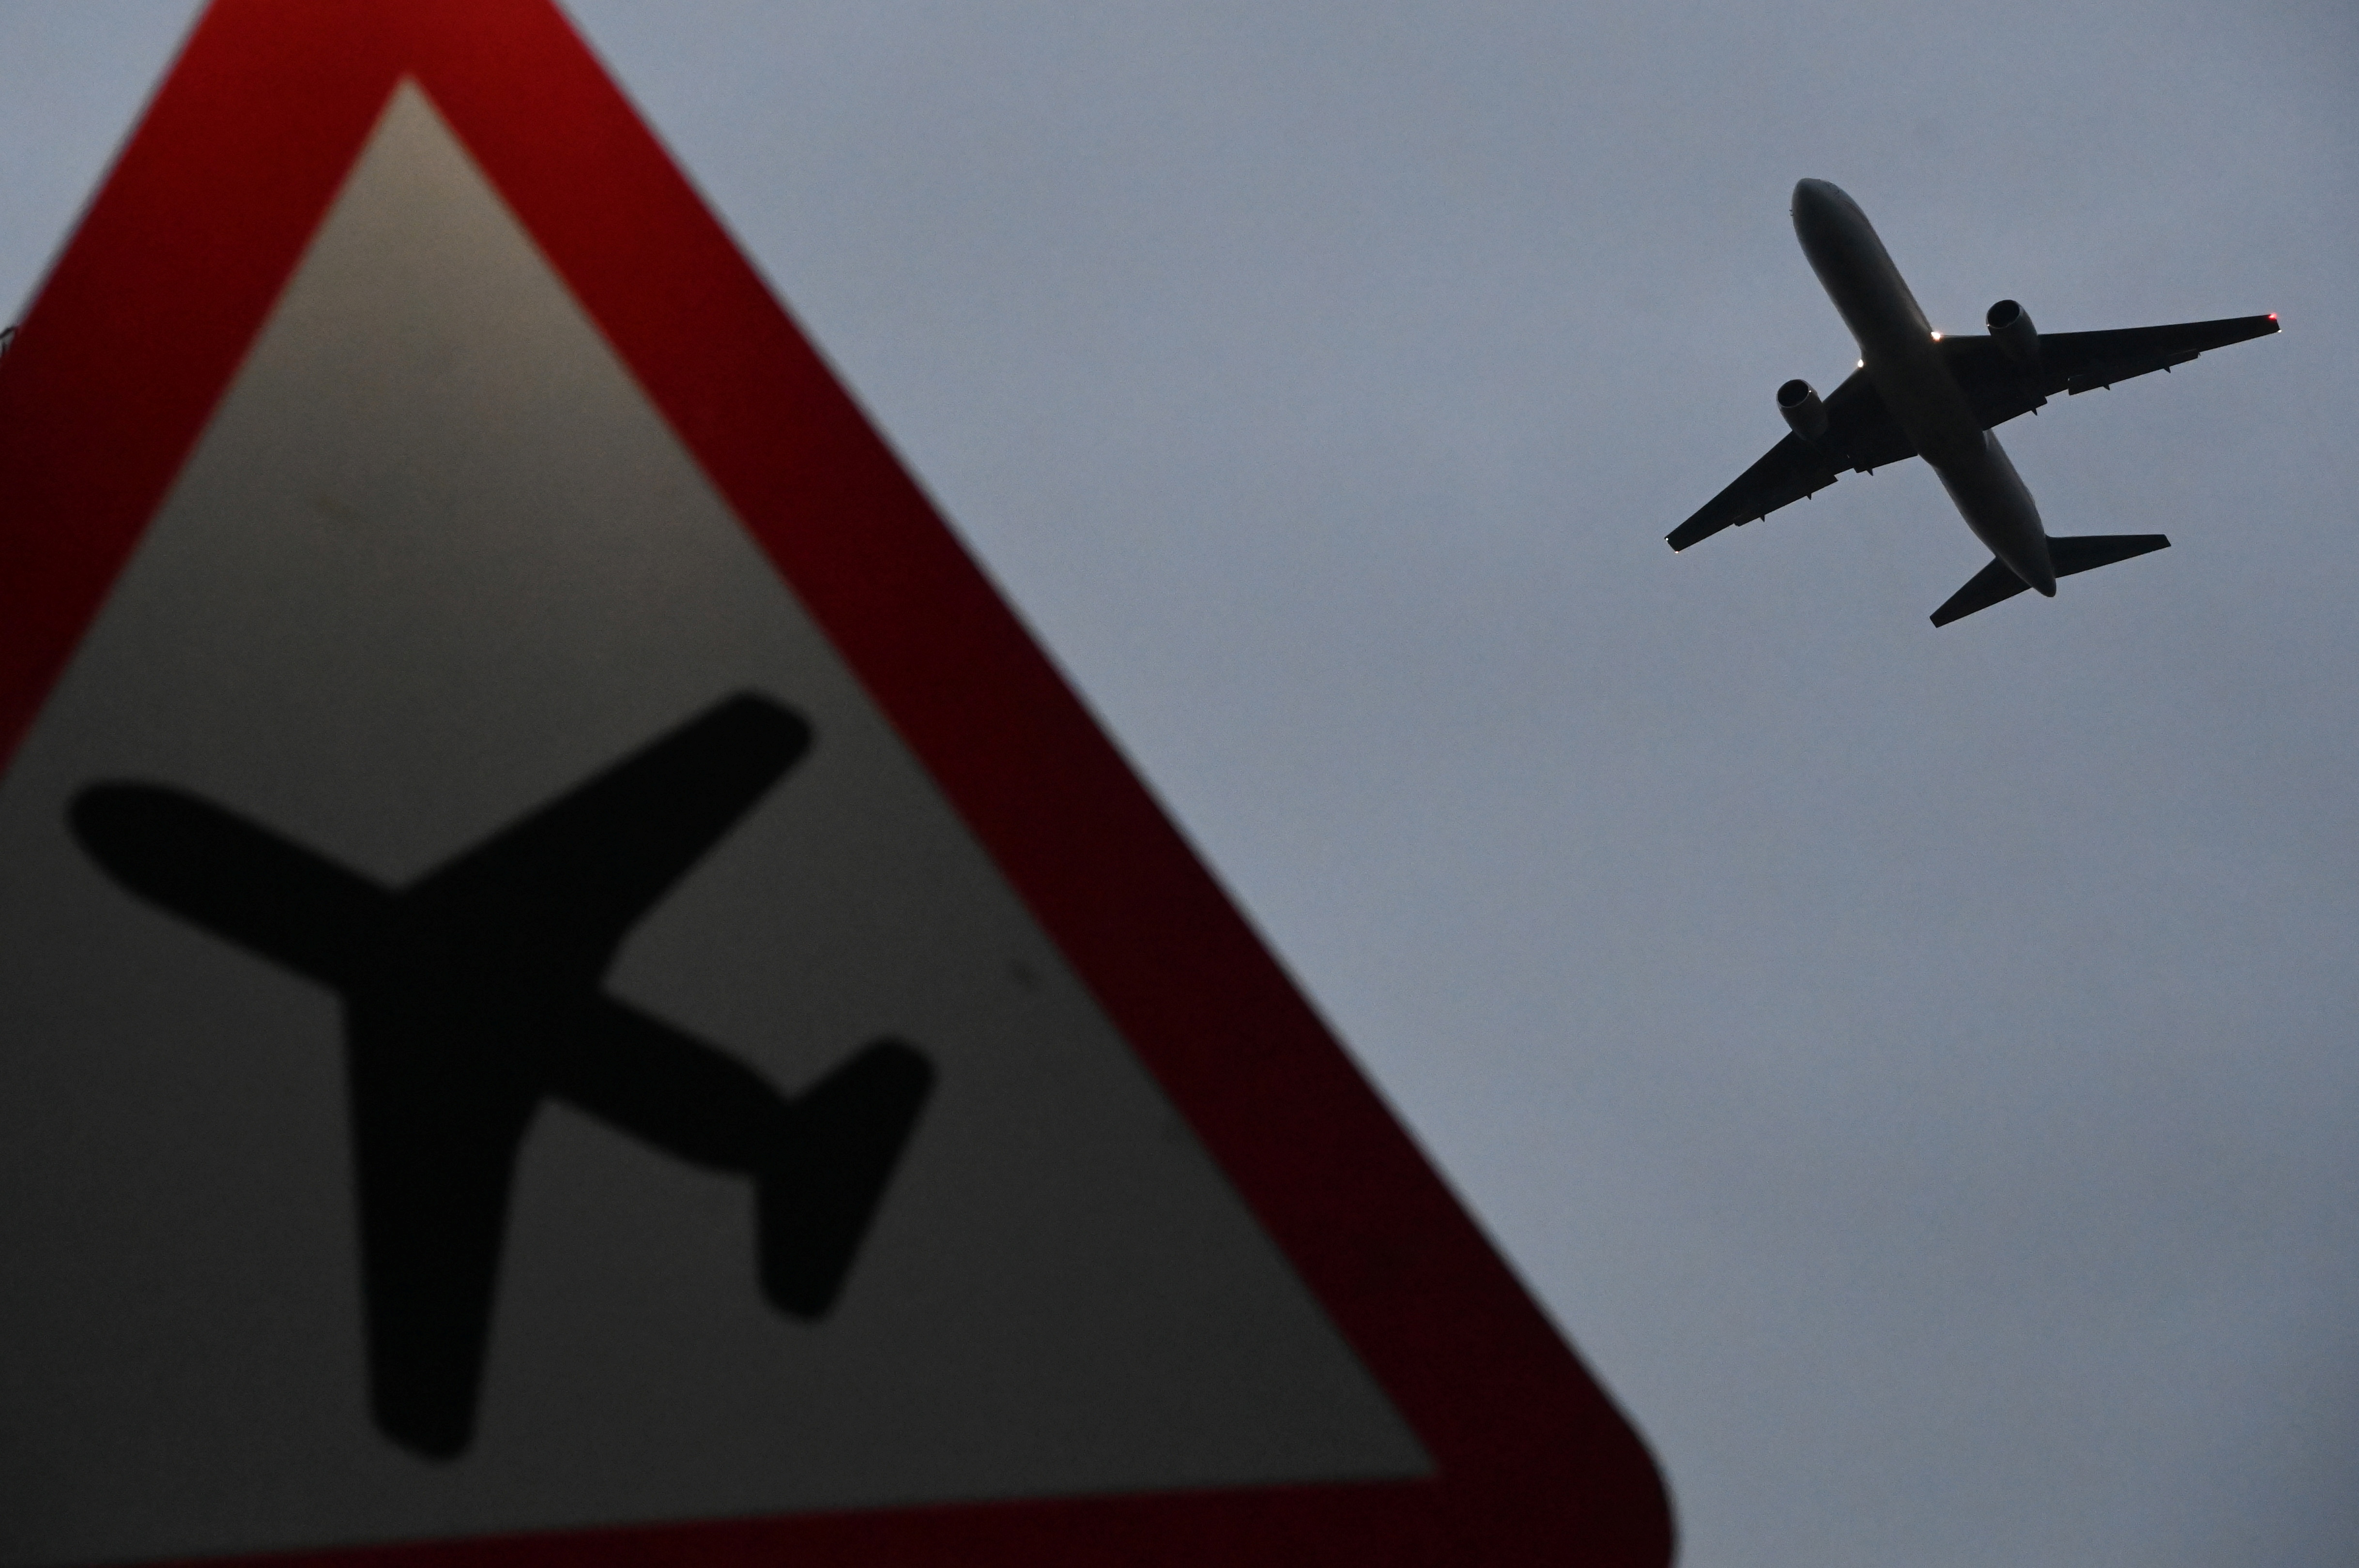 Aircraft takes off at Heathrow Airport amid COVID-19 pandemic in London